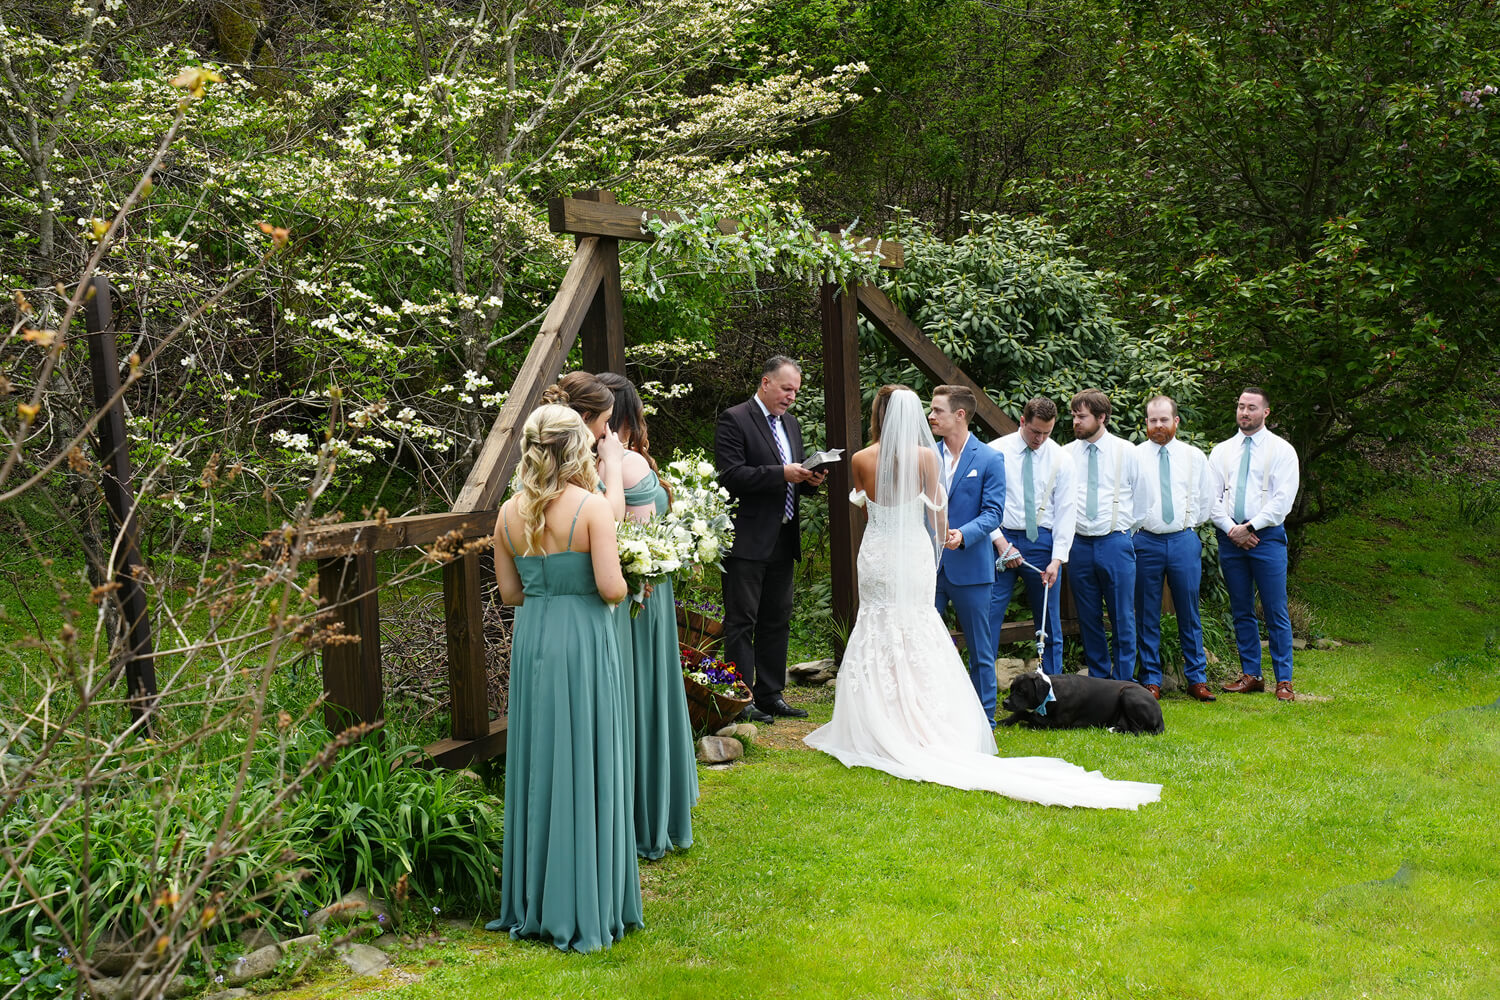 Early spring wedding with dogwood trees in bloom at a wooden wedding arbor